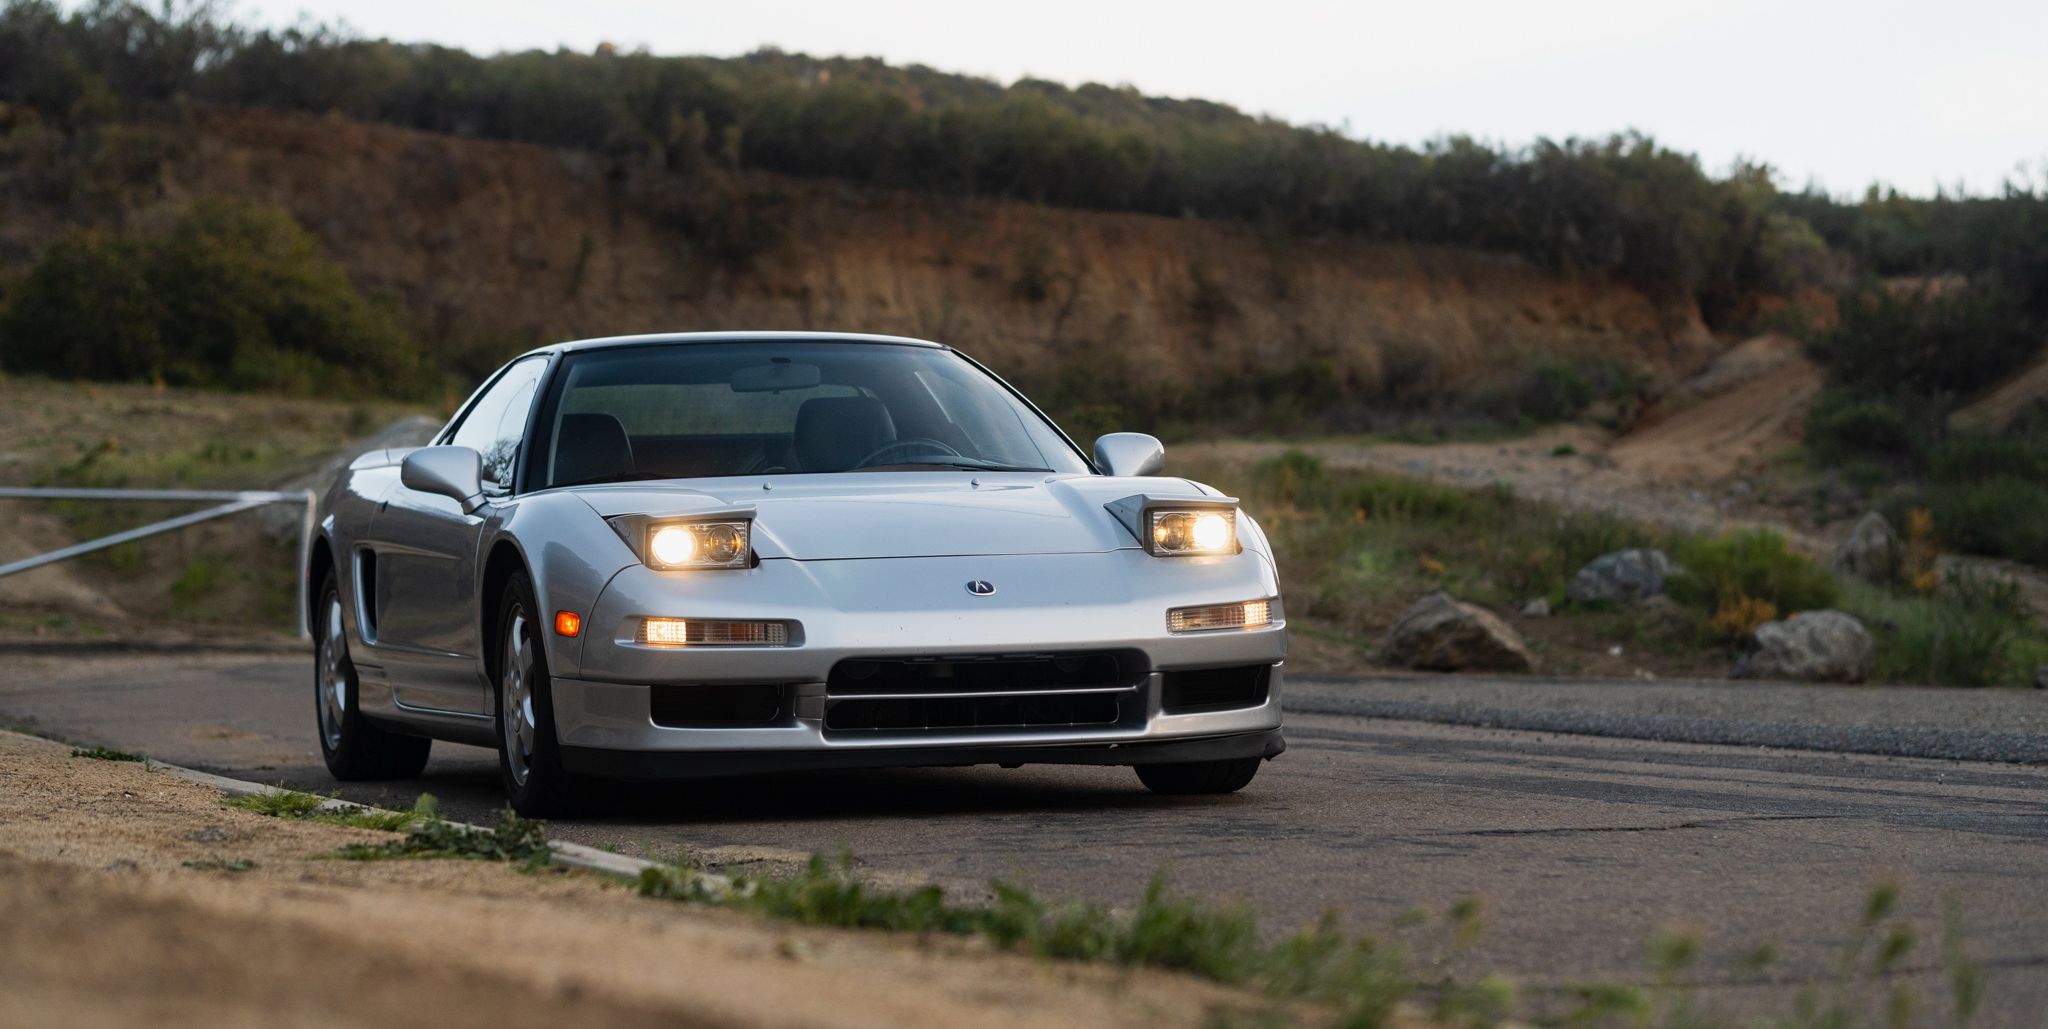 Driving the Original Acura NSX Ruins Every New Car